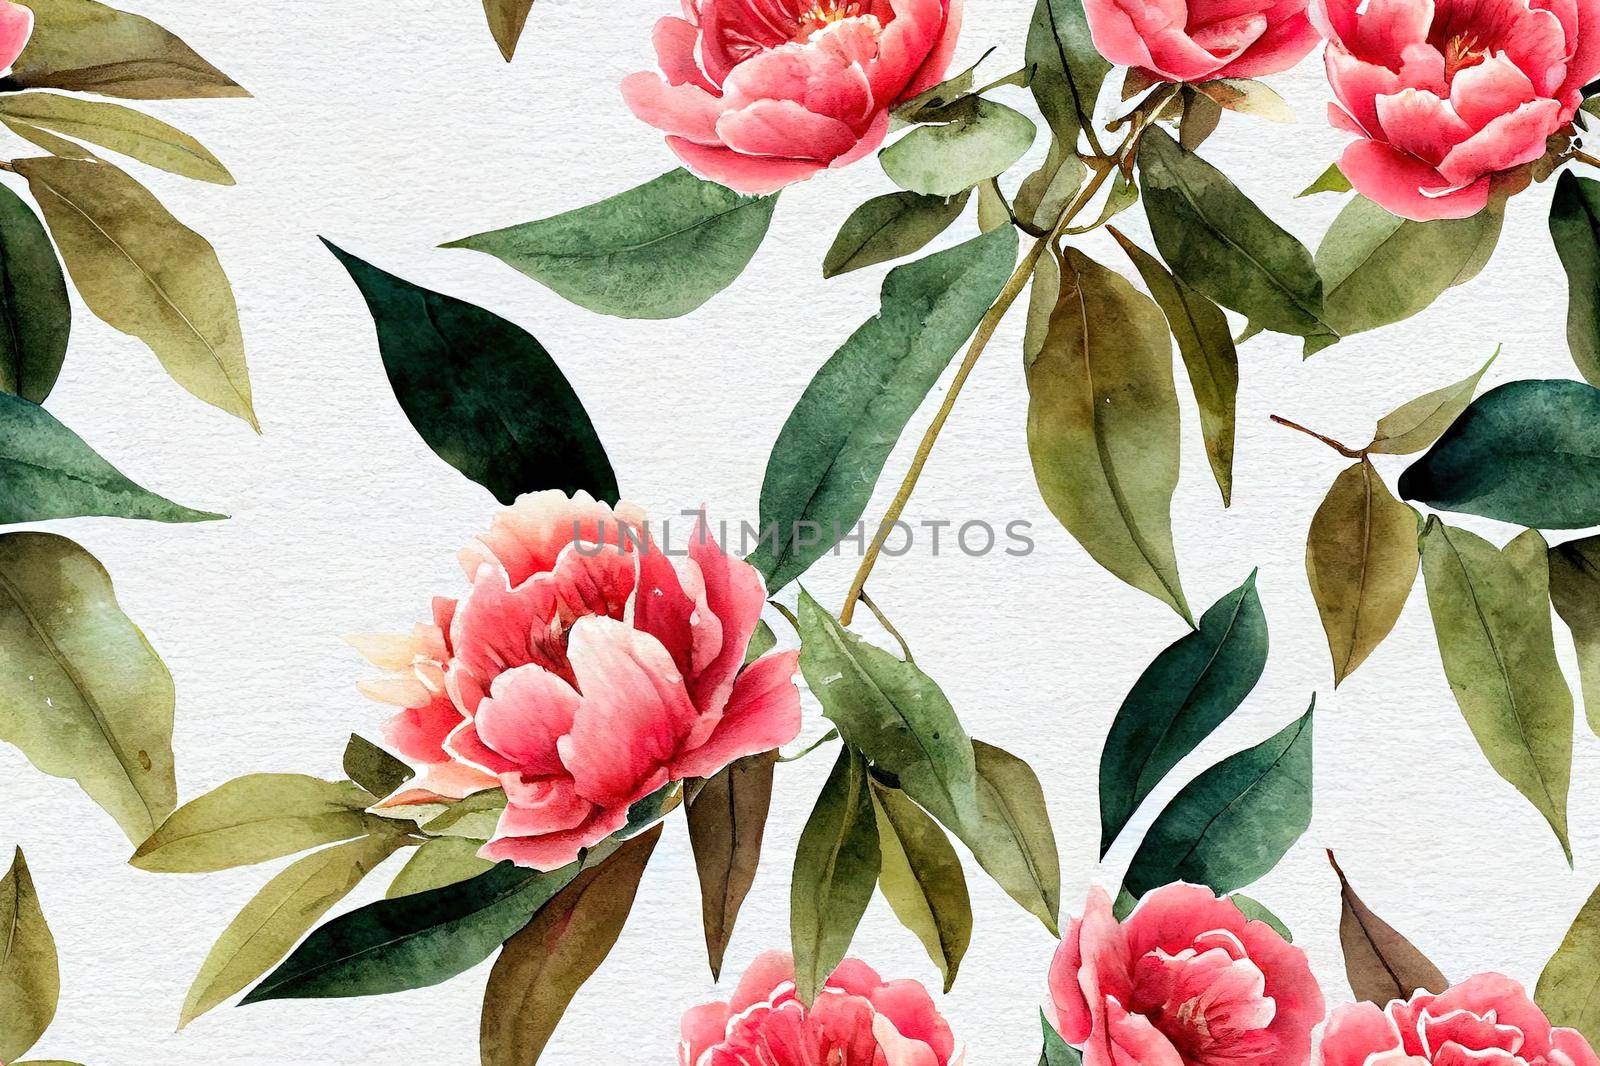 Watercolor Autumn flora. A bouquet of autumn flowers. Roses, peonies, leaves, buds. Vintage wedding bouquet. Watercolor botanical illustration. Sketch. Botanic. Floral border, seamless pattern. High quality illustration